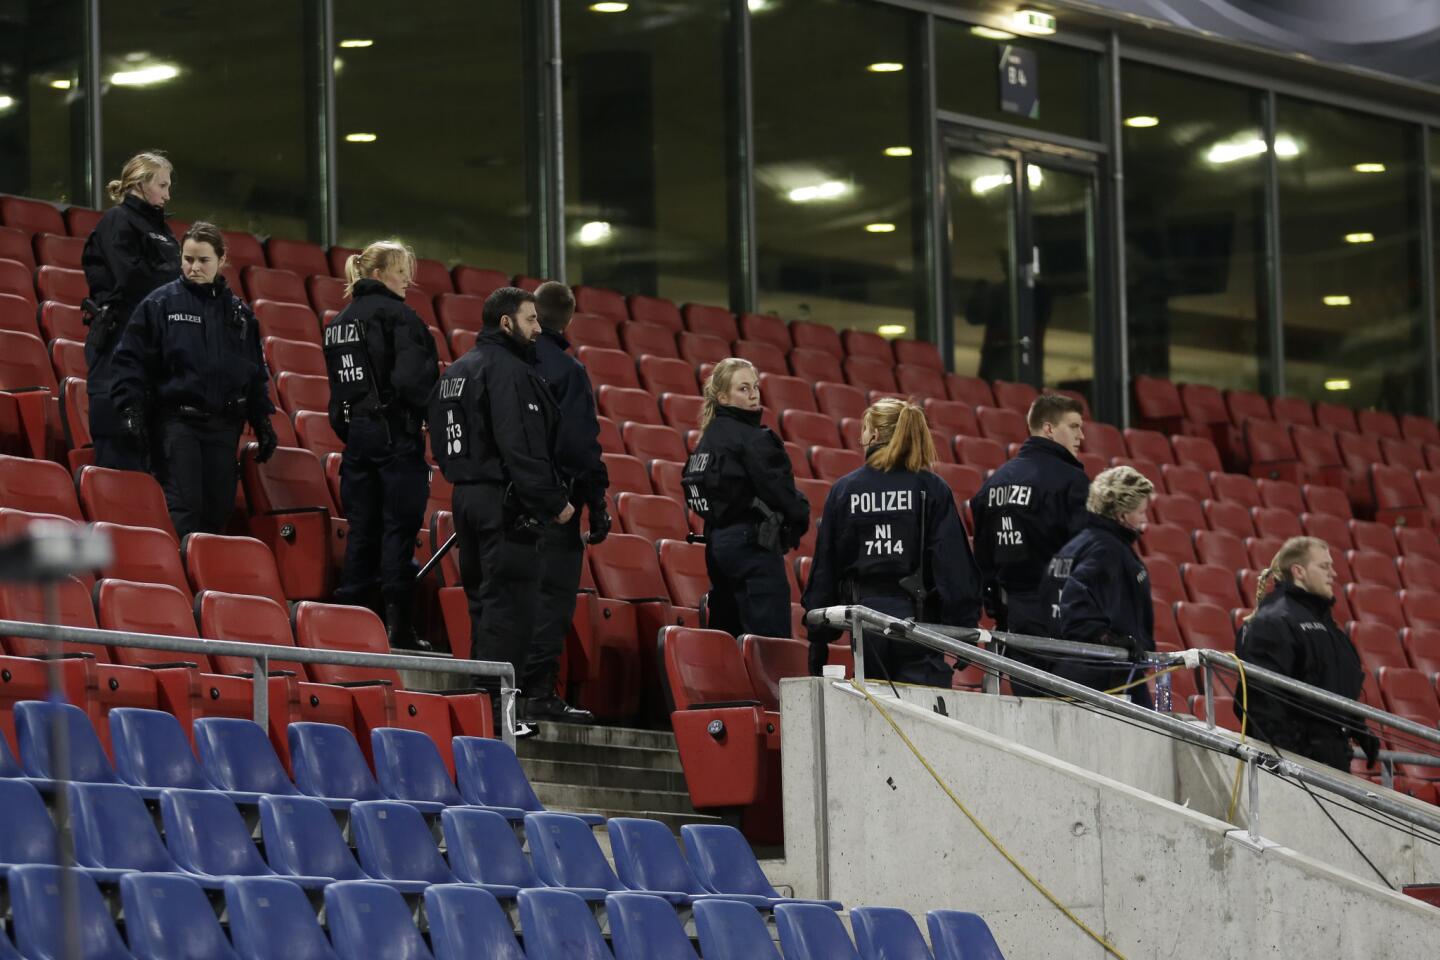 German police officers search between the seats of the stadium prior to an international friendly soccer match between Germany and the Netherlands in Hannover, Germany, Tuesday, Nov. 17, 2015. Following the Friday's attacks in Paris, security measures have been increased for the match.